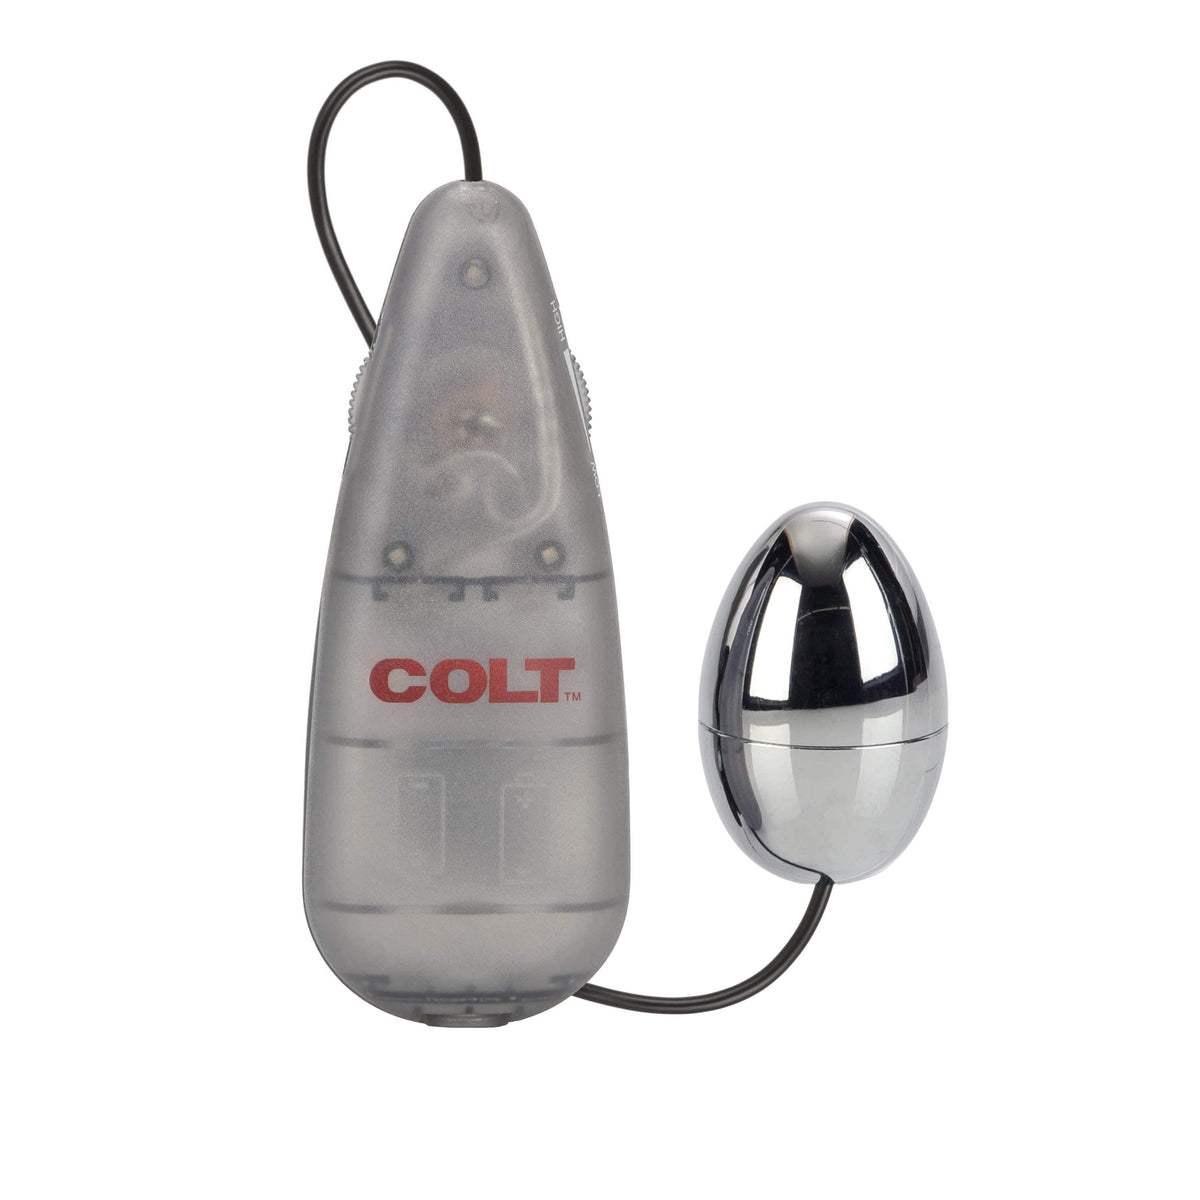 California Exotics - COLT Multi Speed Power Bullet Pak Universal Egg with Remote (Silver) CE1859 CherryAffairs